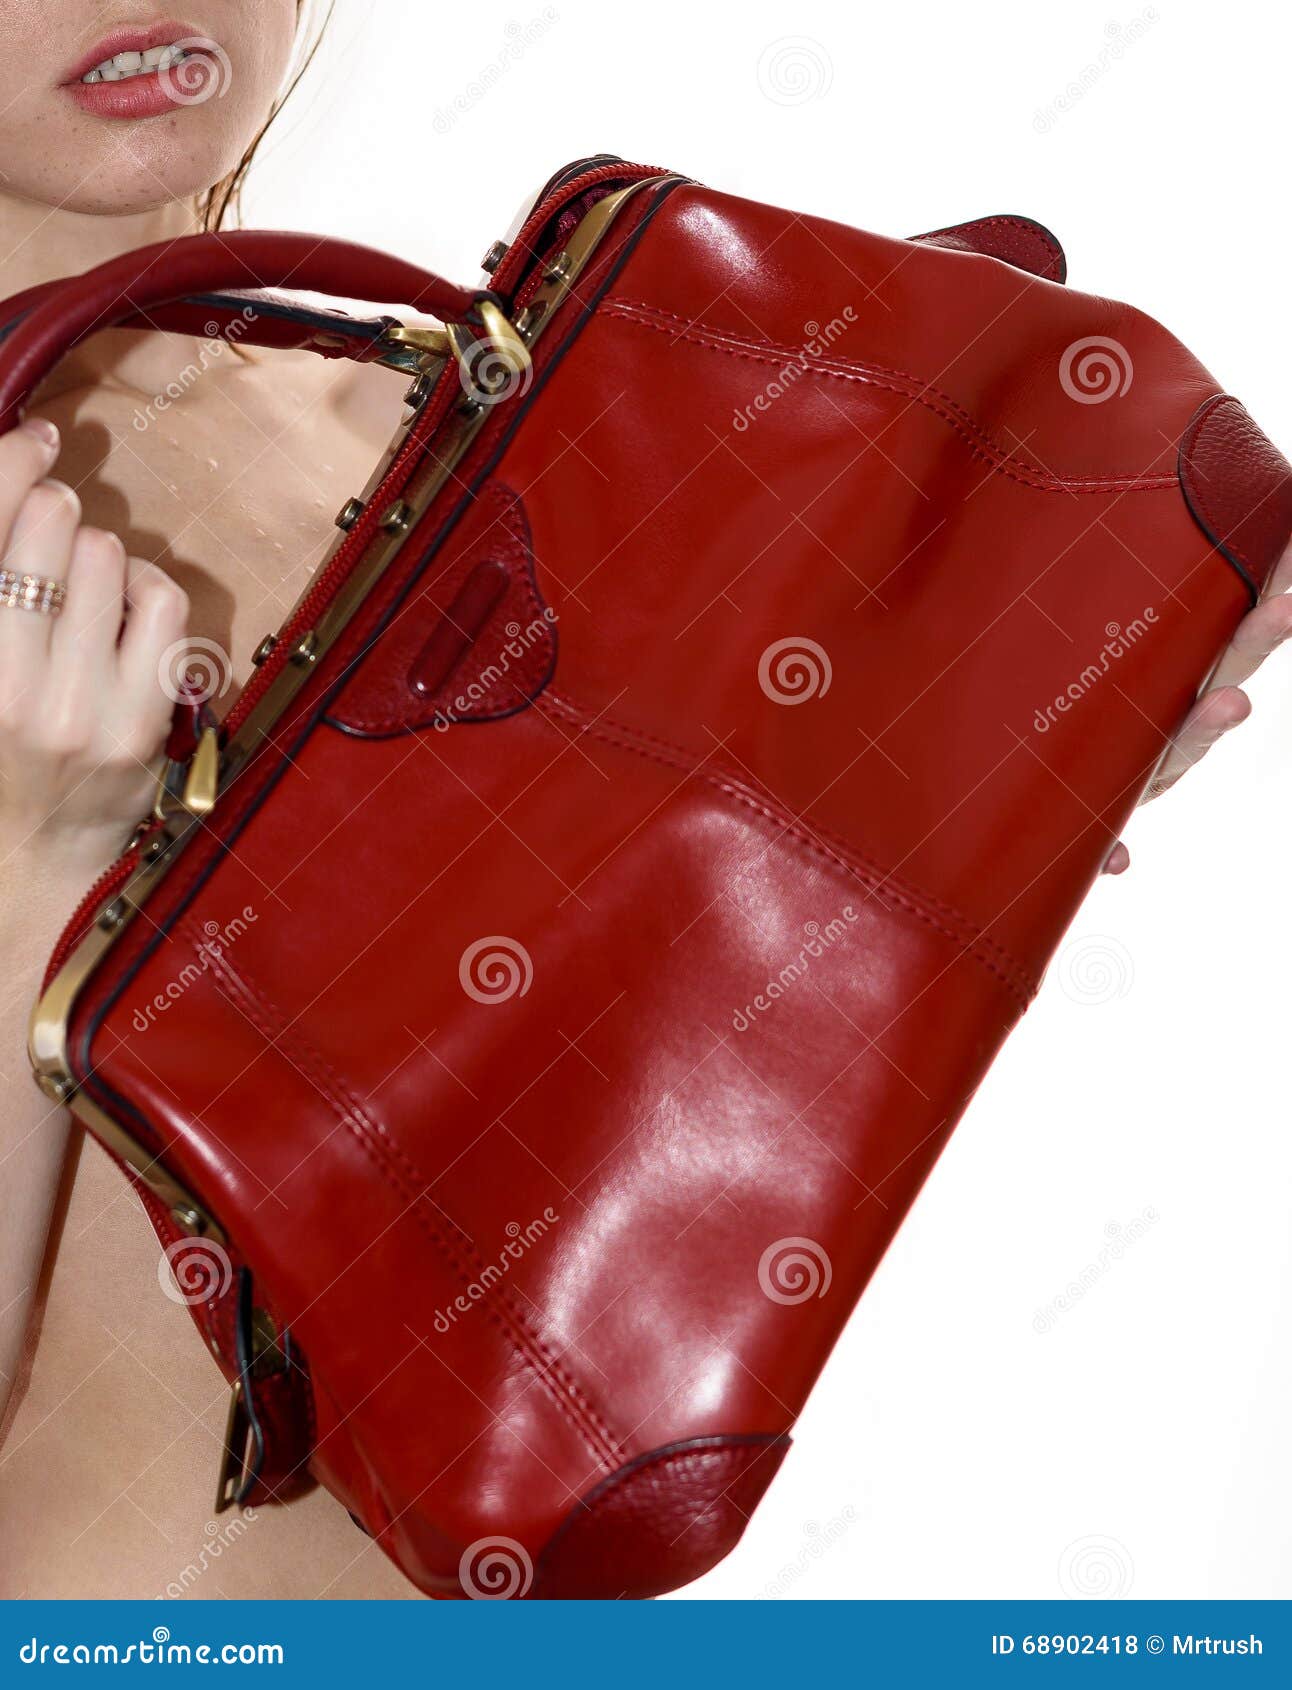 Woman With Red Handbag In Hands Stock Photo - Image of fashion, leather ...